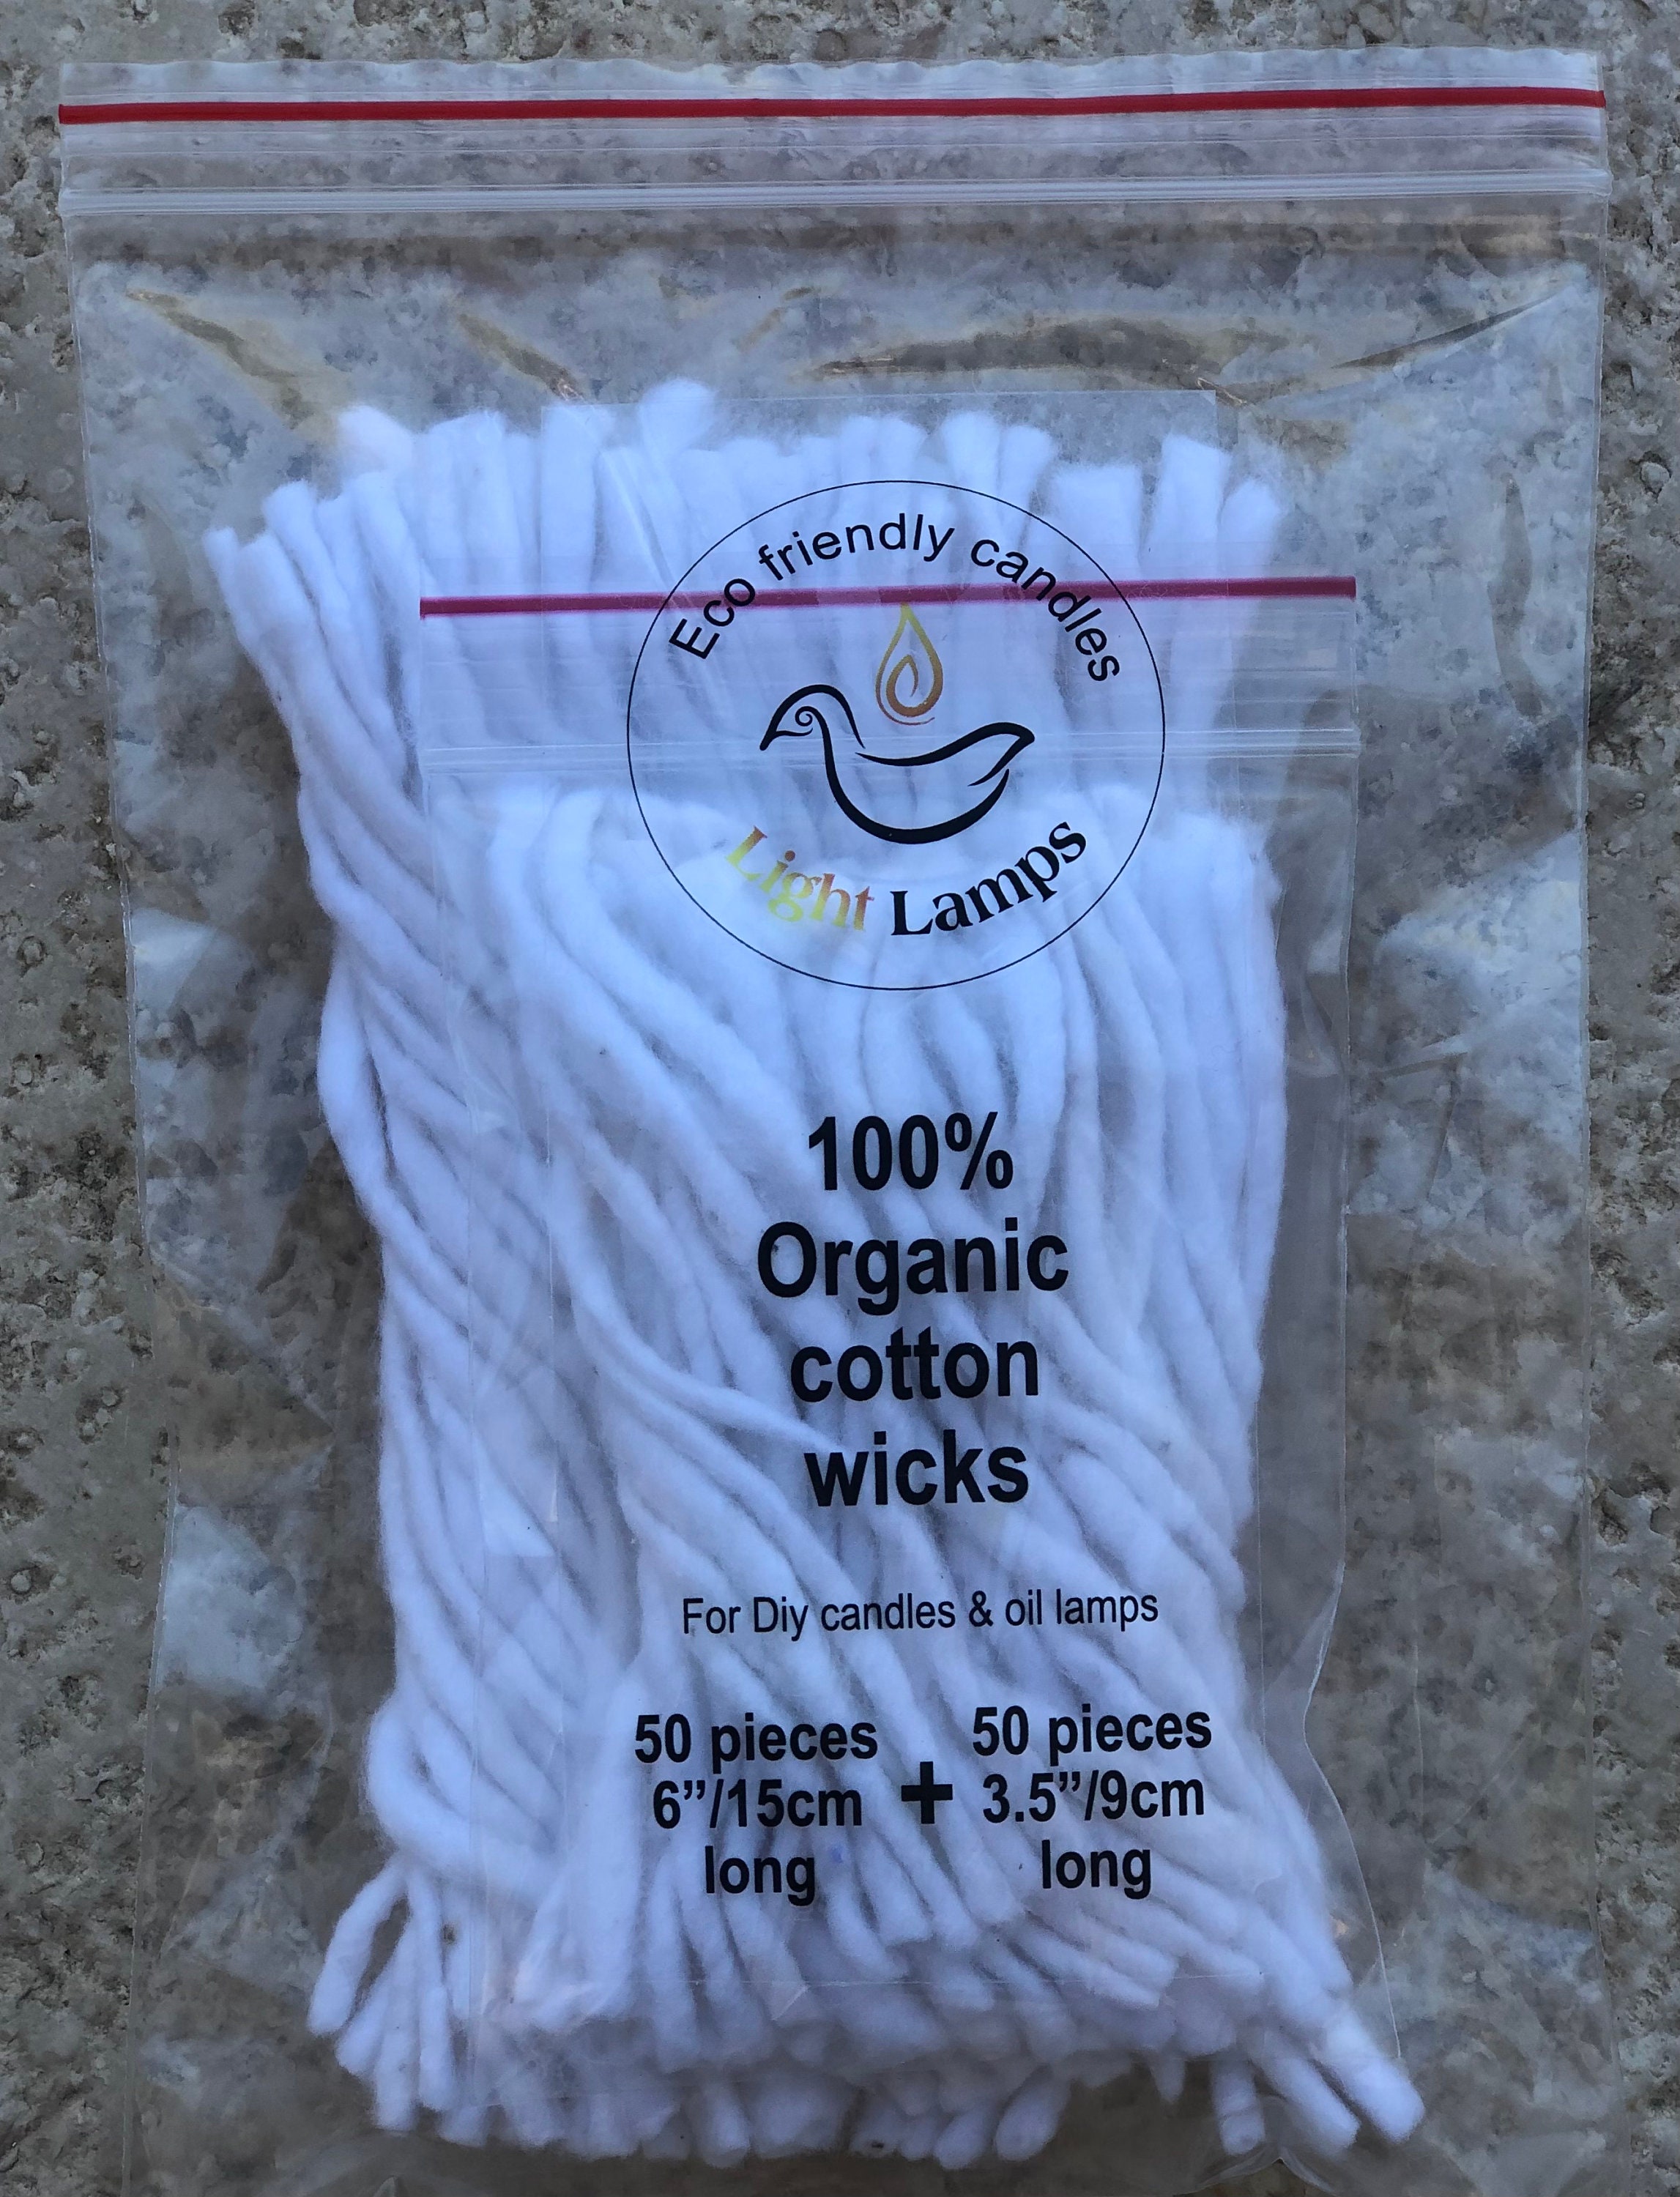 Organic Wicks for DIY Candles and Oil Lamps, Handmade 100 Eco Cotton Wicks,  6long/ 15 Cm, OIL LAMP Wicks, Organic Cotton Wicks for Candles 